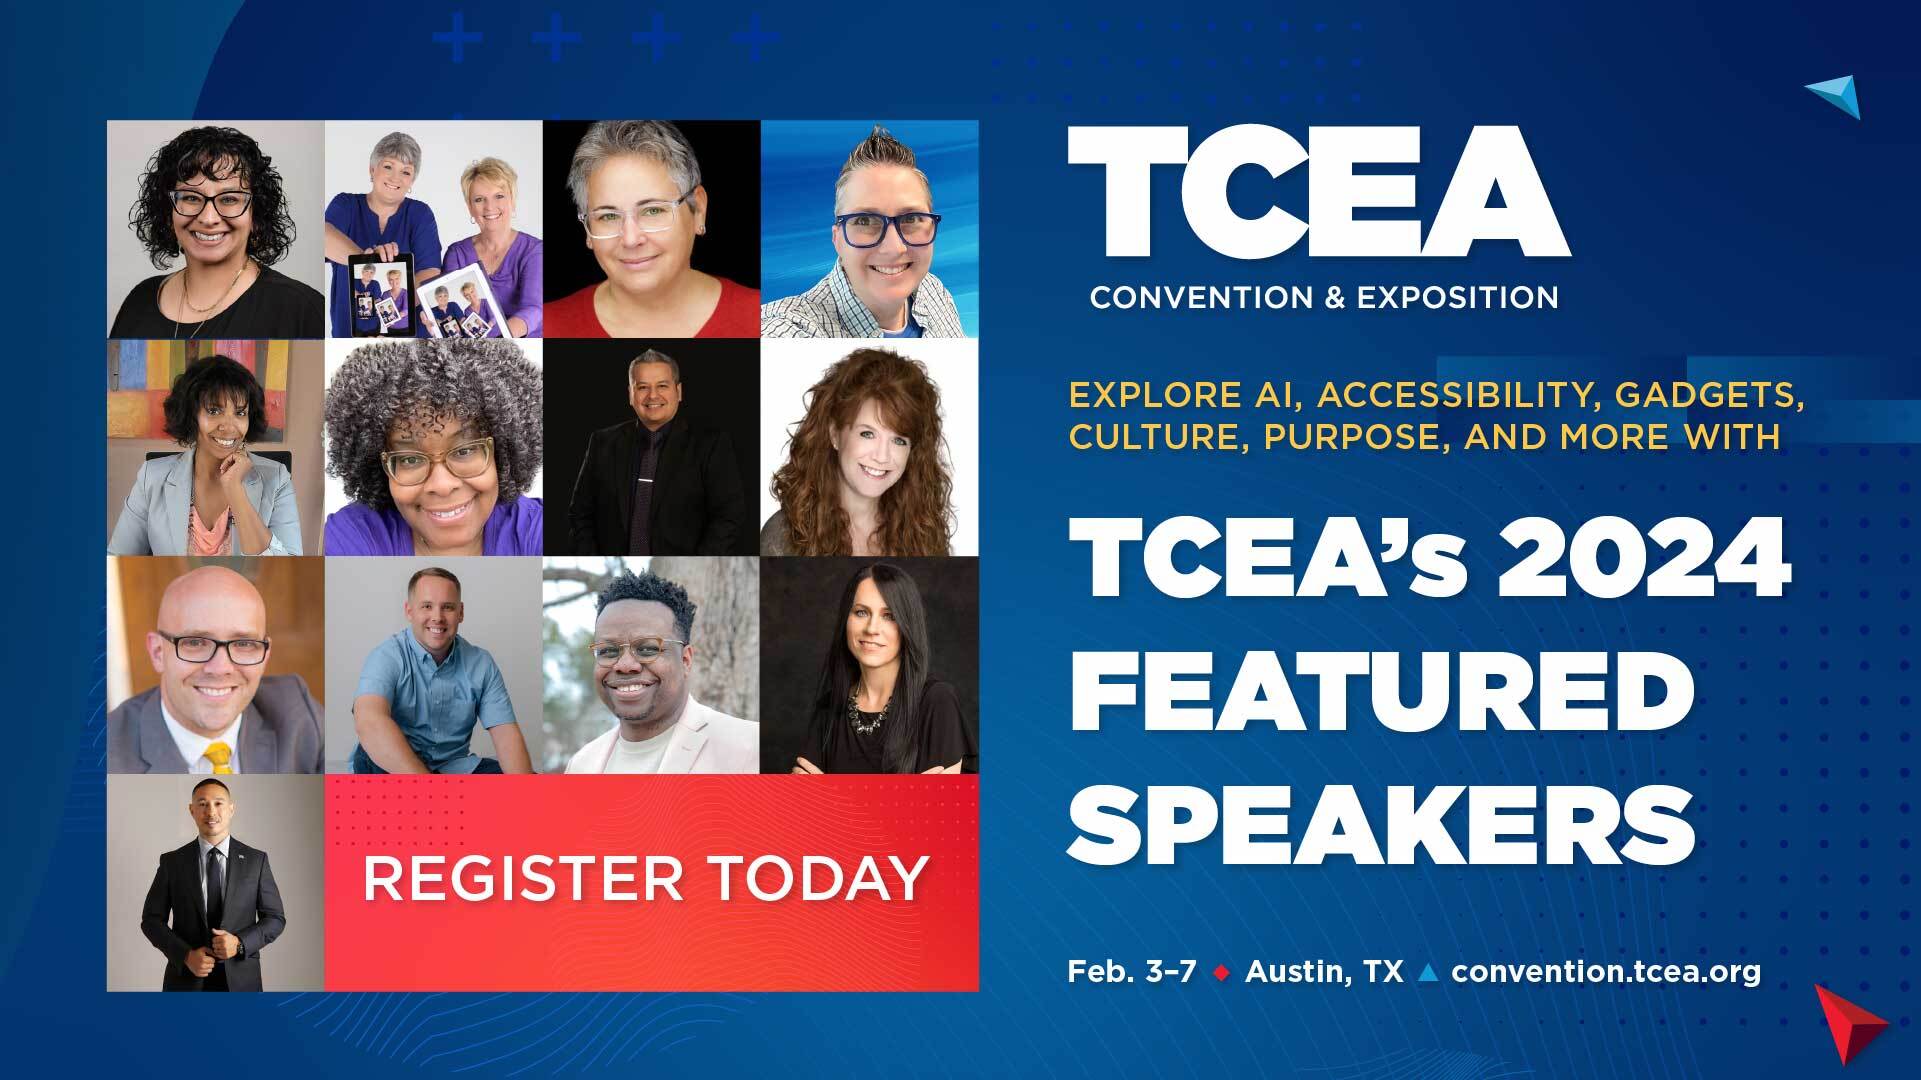 The Speakers at the TCEA Convention Won't Disappoint